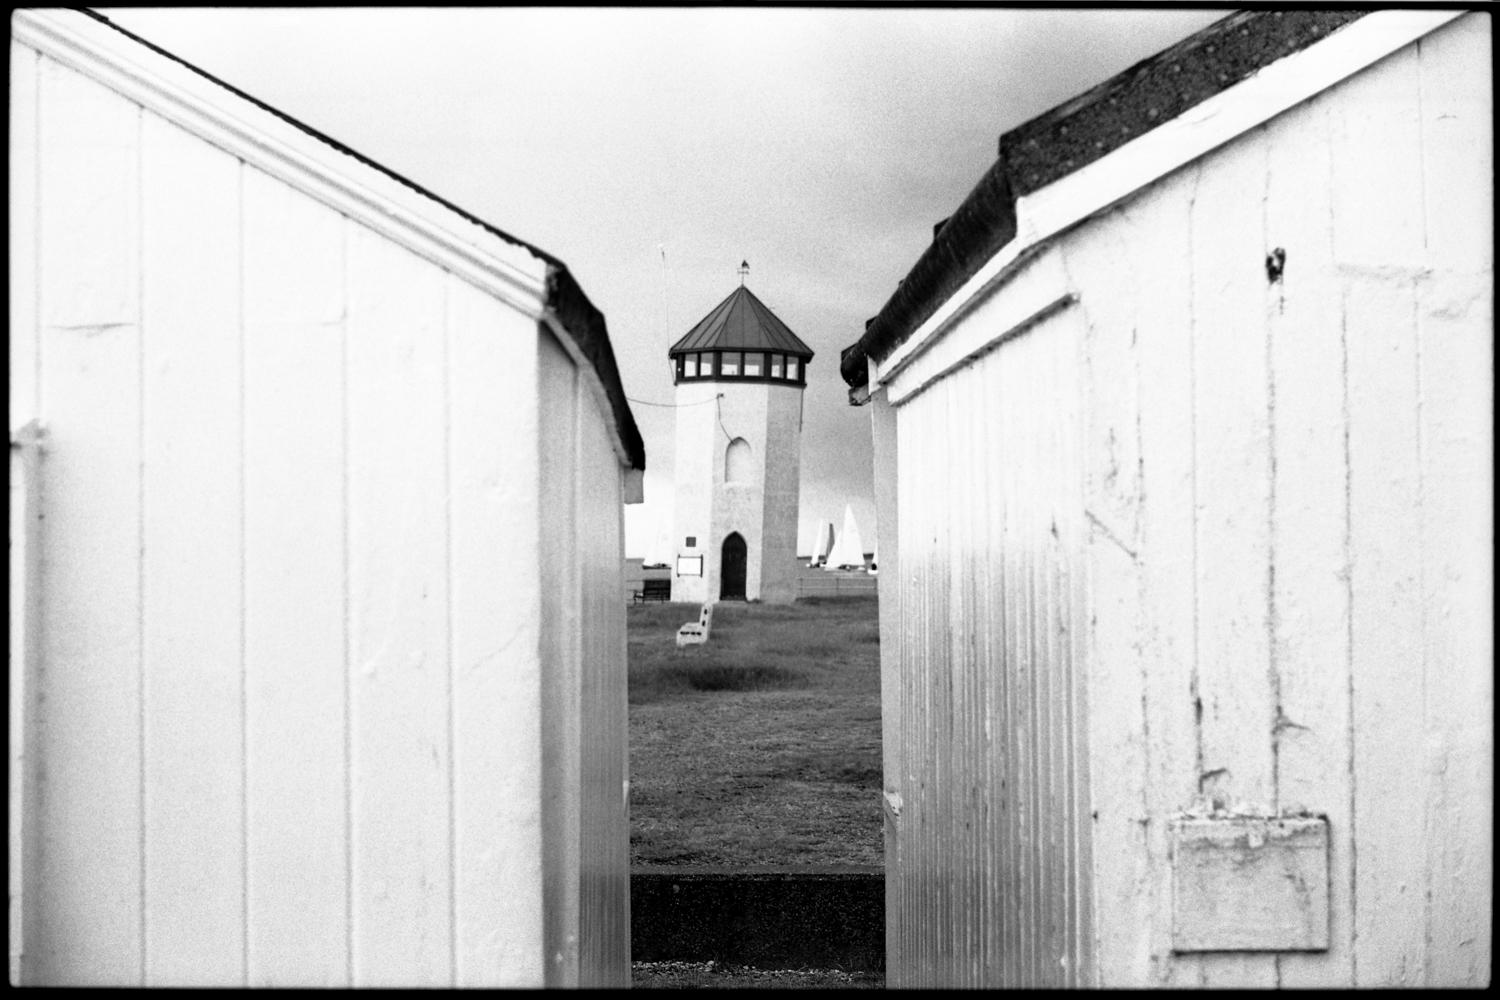 Paul Cooklin Black and White Photograph - Edition 1/10 - Brightlingsea, Essex VIII, Silver Gelatin Photograph